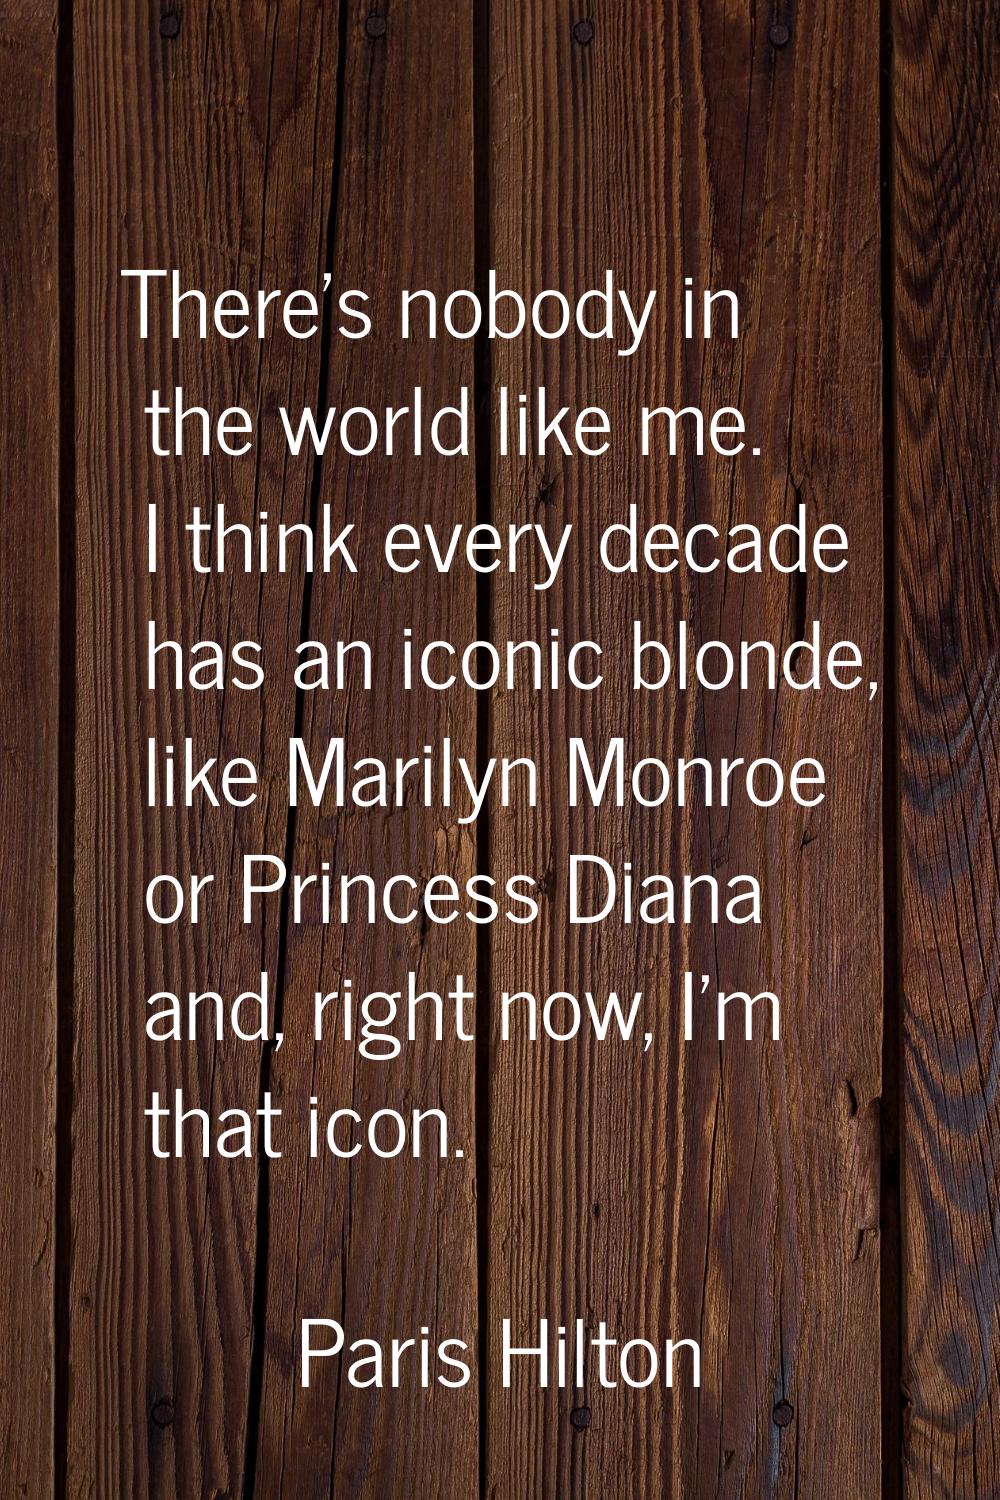 There's nobody in the world like me. I think every decade has an iconic blonde, like Marilyn Monroe